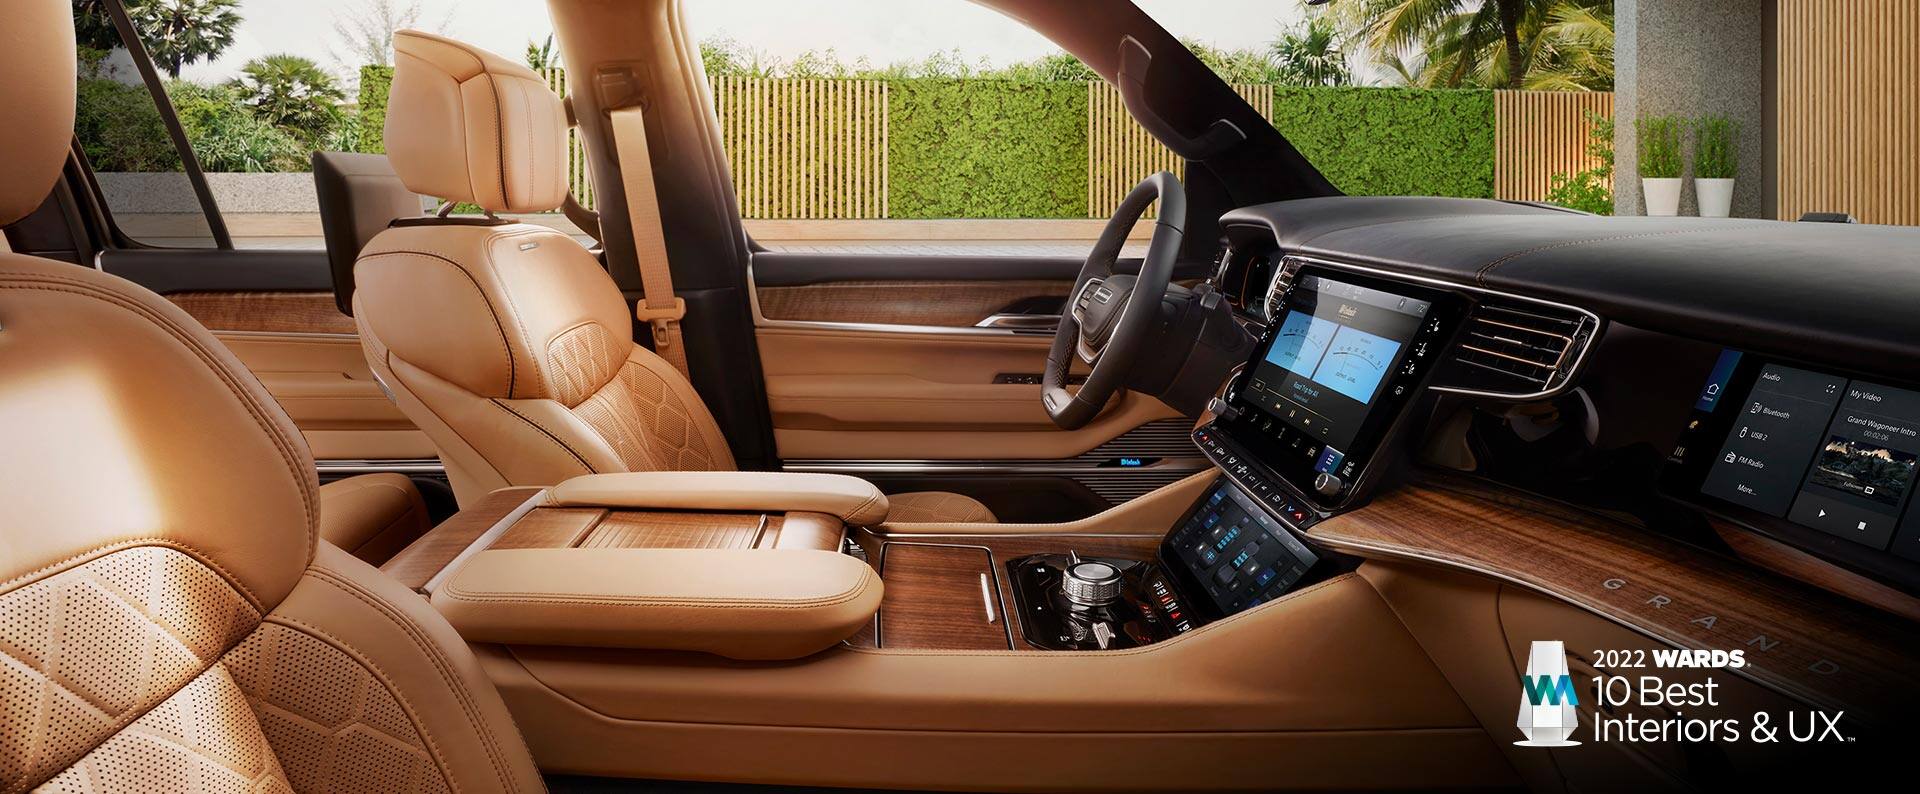 The front seats, steering wheel, center stack controls and driver and front passenger touchscreens in the 2022 Grand Wagoneer Series III. The 2022 Wards 10 best interiors and UX award logo.